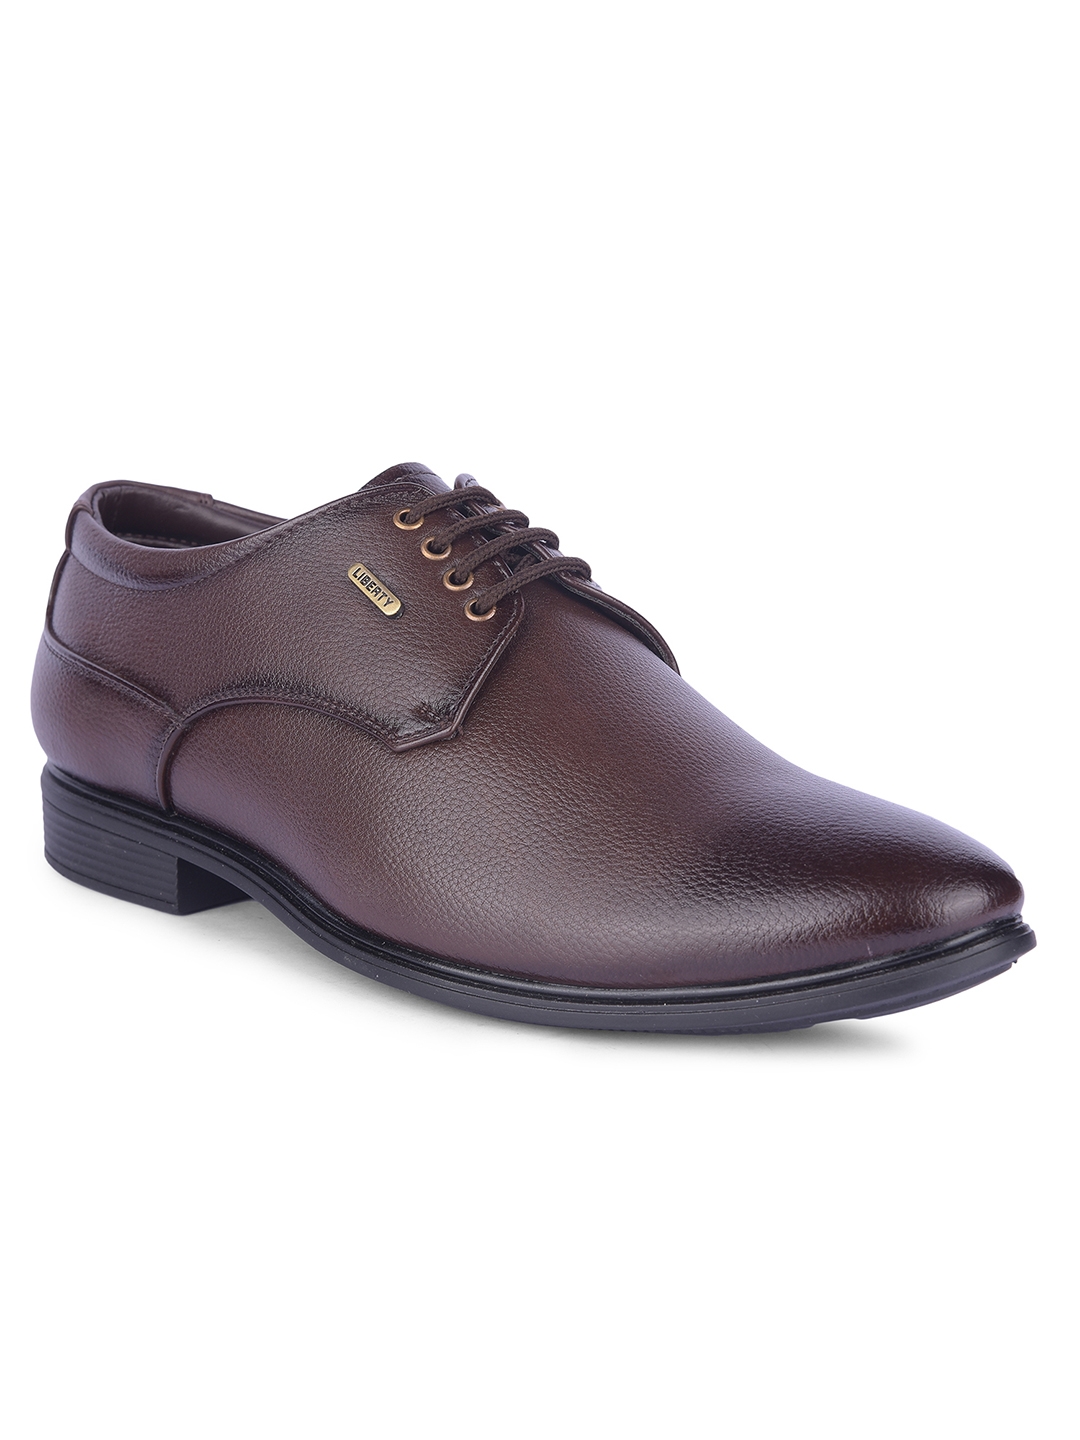 Liberty | Liberty Fortune Hil-5 Mens Brown Formal Shoes